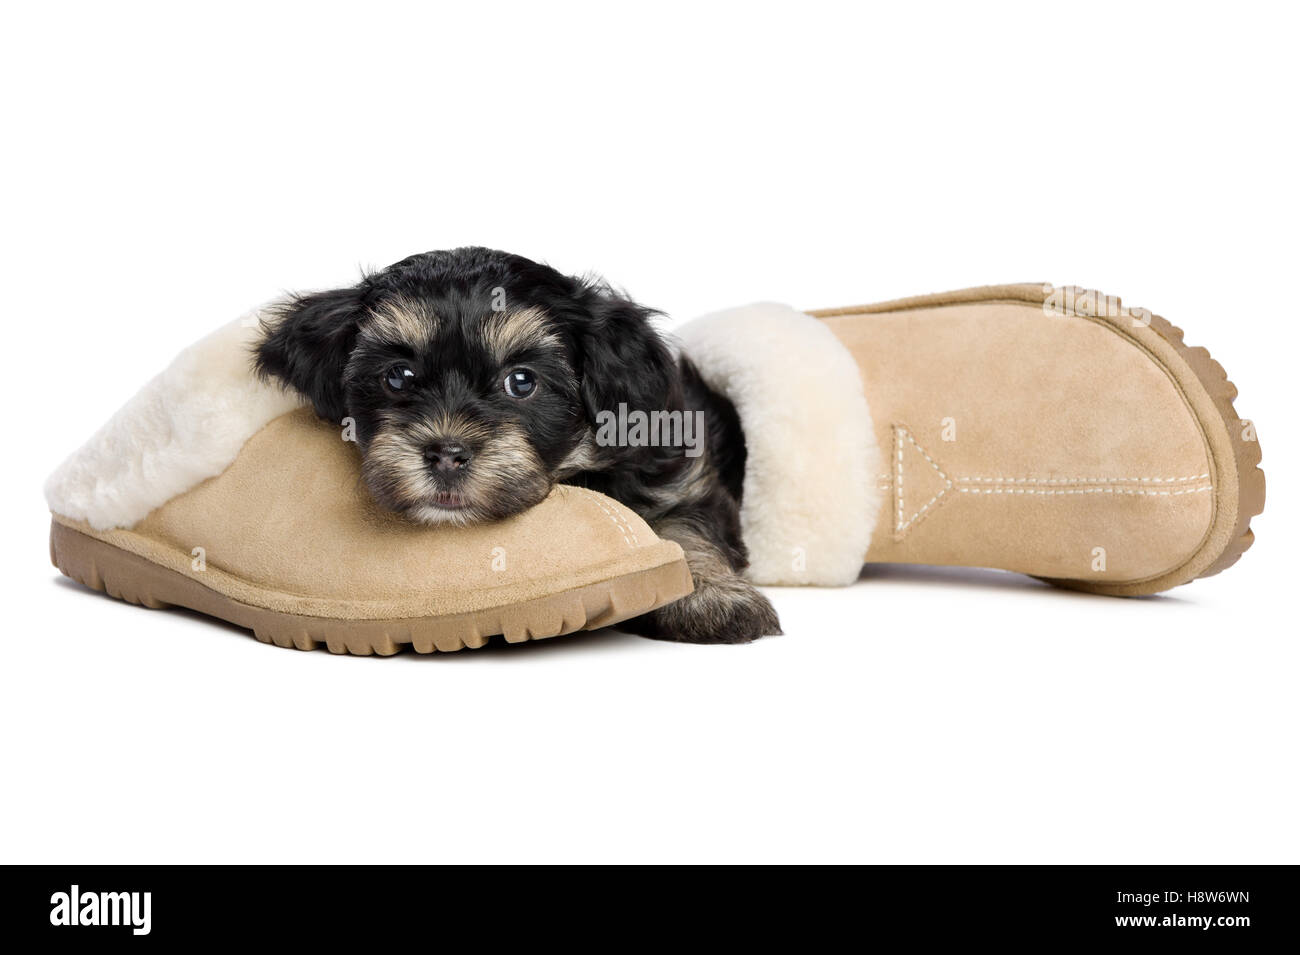 Cute havanese puppy dog is lying on a slipper and waiting for her owner Stock Photo